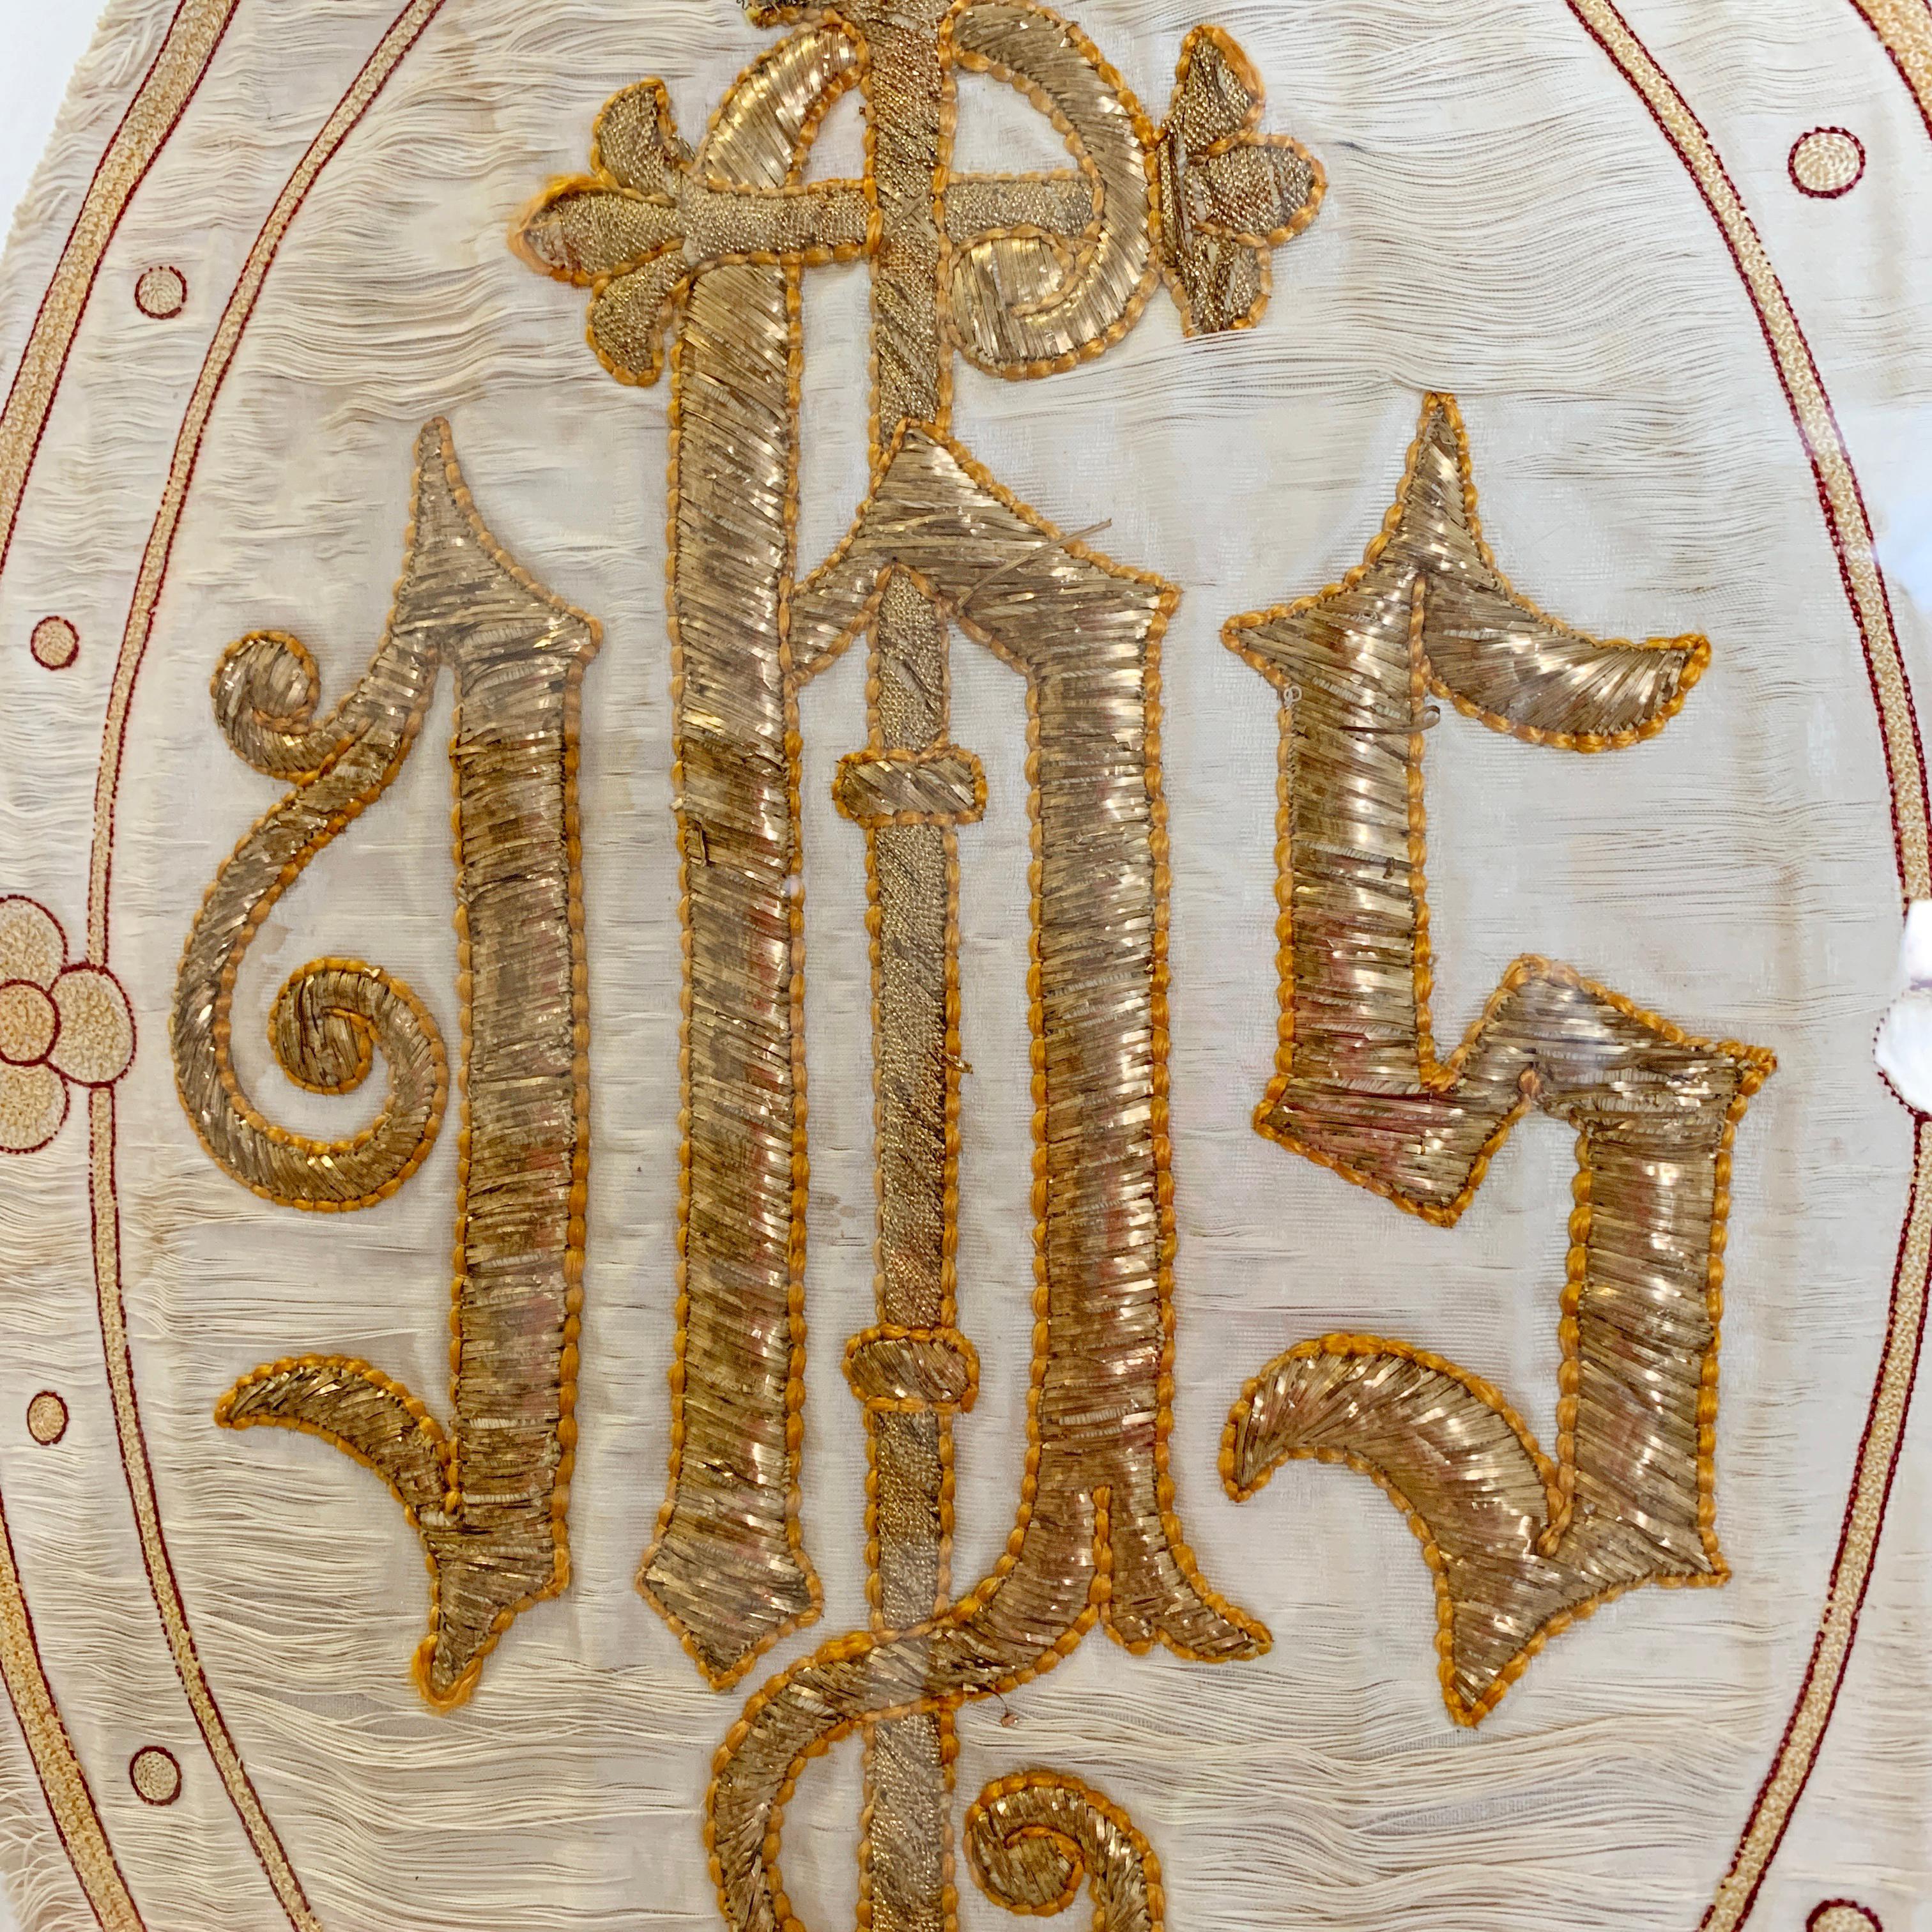 Hand-Crafted French 'IHS' Embroidered Religious Panel